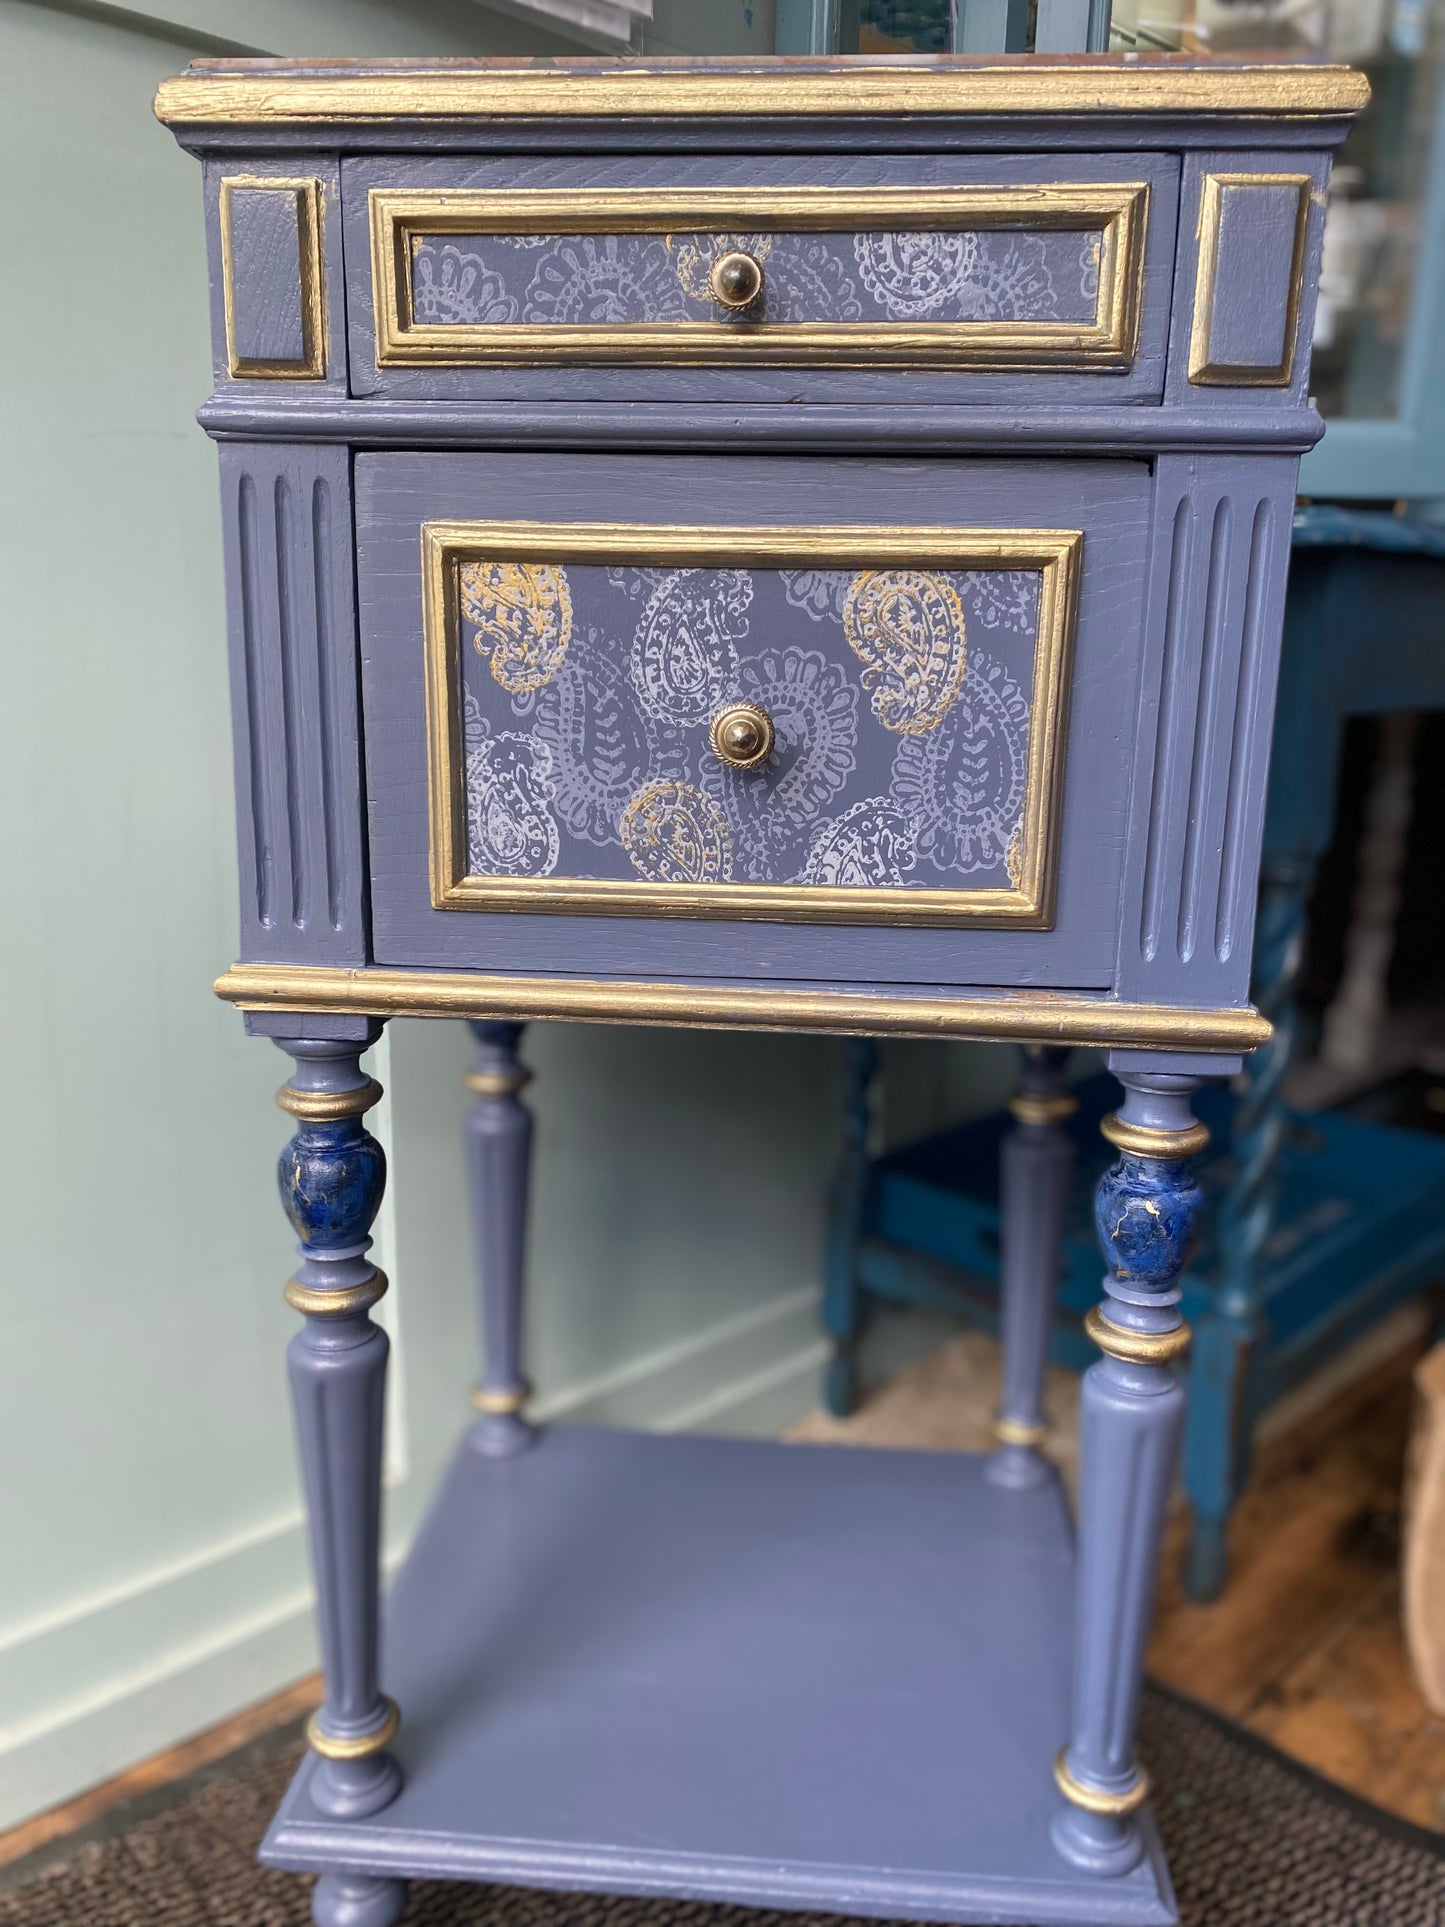 Vintage French Louis Style Cabinet. Circa 1900 Chevet Bedside Table. Antique Marble Top Lamp Table. Indian Paisley Block Print Pattern. Blue Chevet